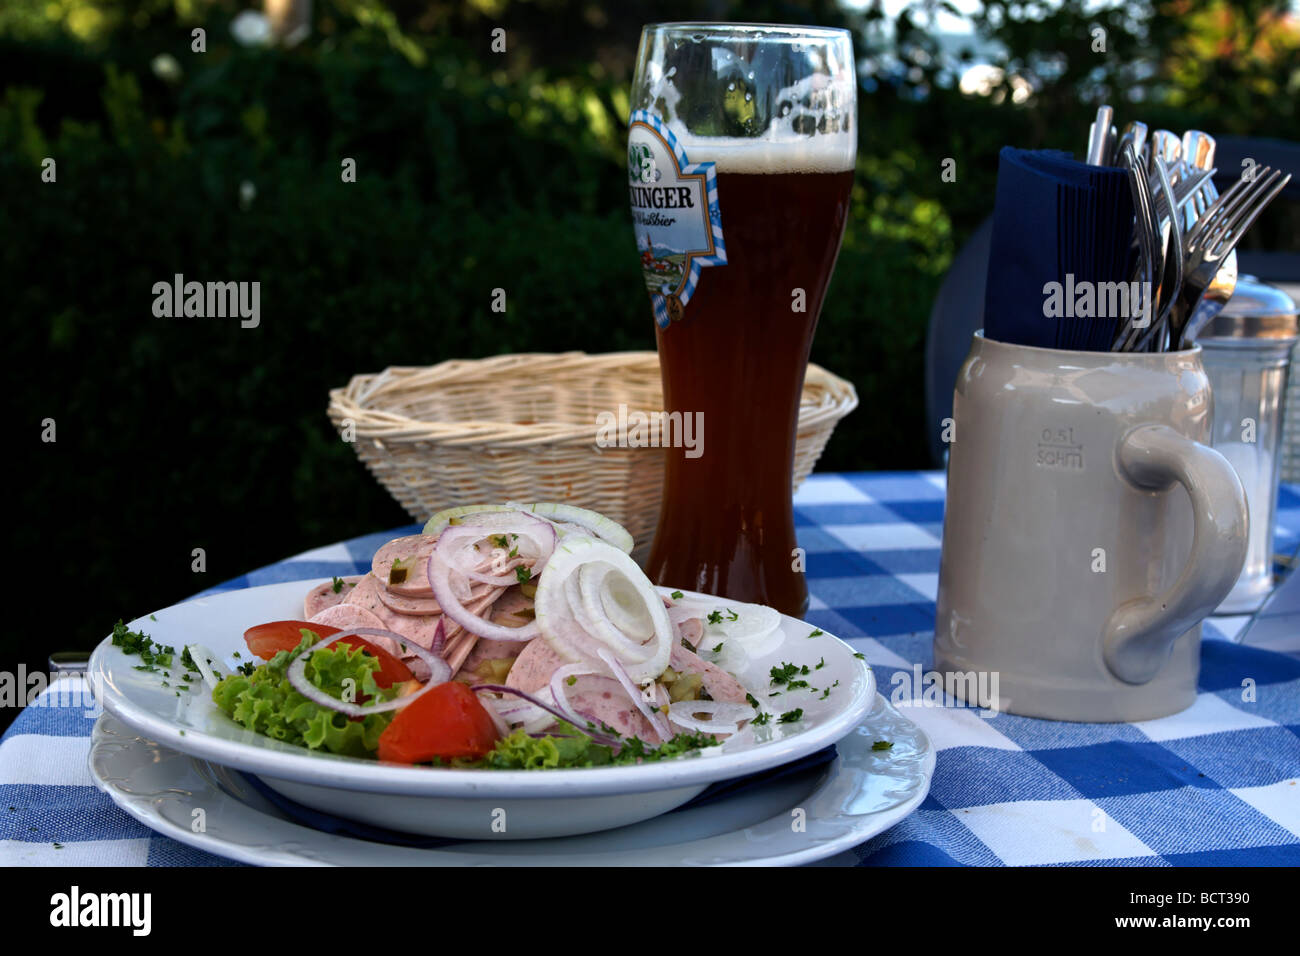 Special Bavarian Dish Wurst Salad and Dark Weiss Beer Germany Stock Photo